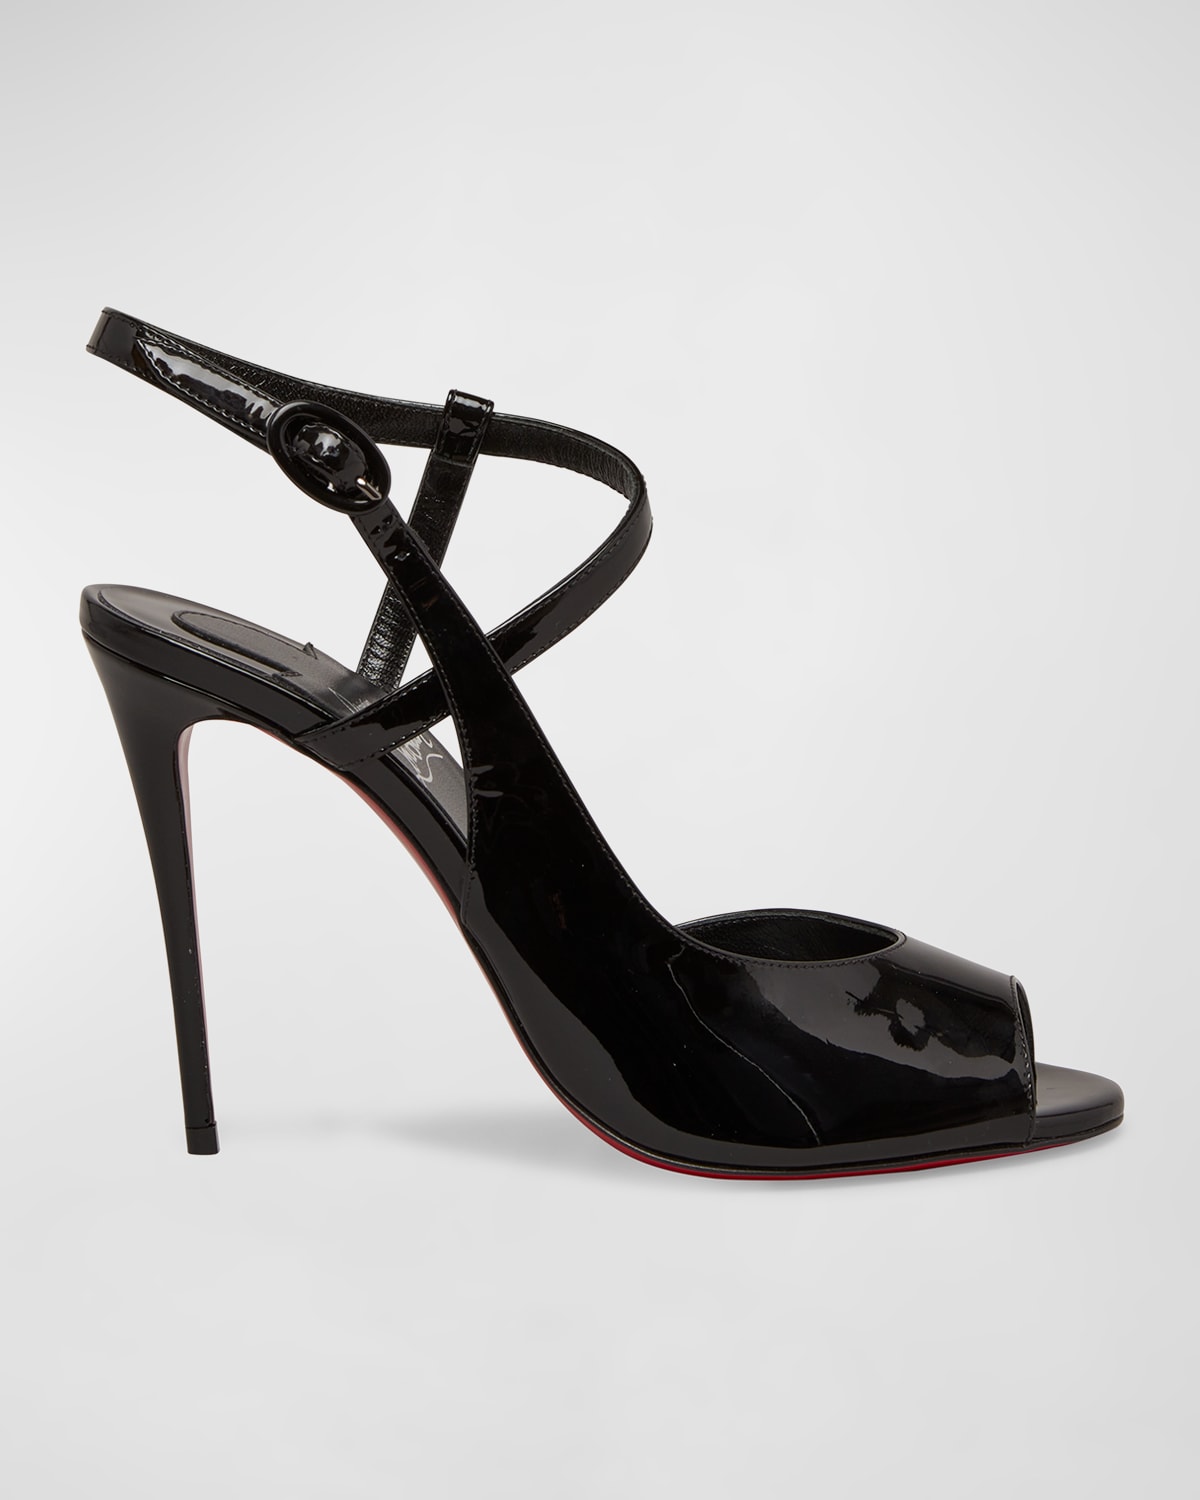 With Red Bottoms Red Sole Sandals Online Store